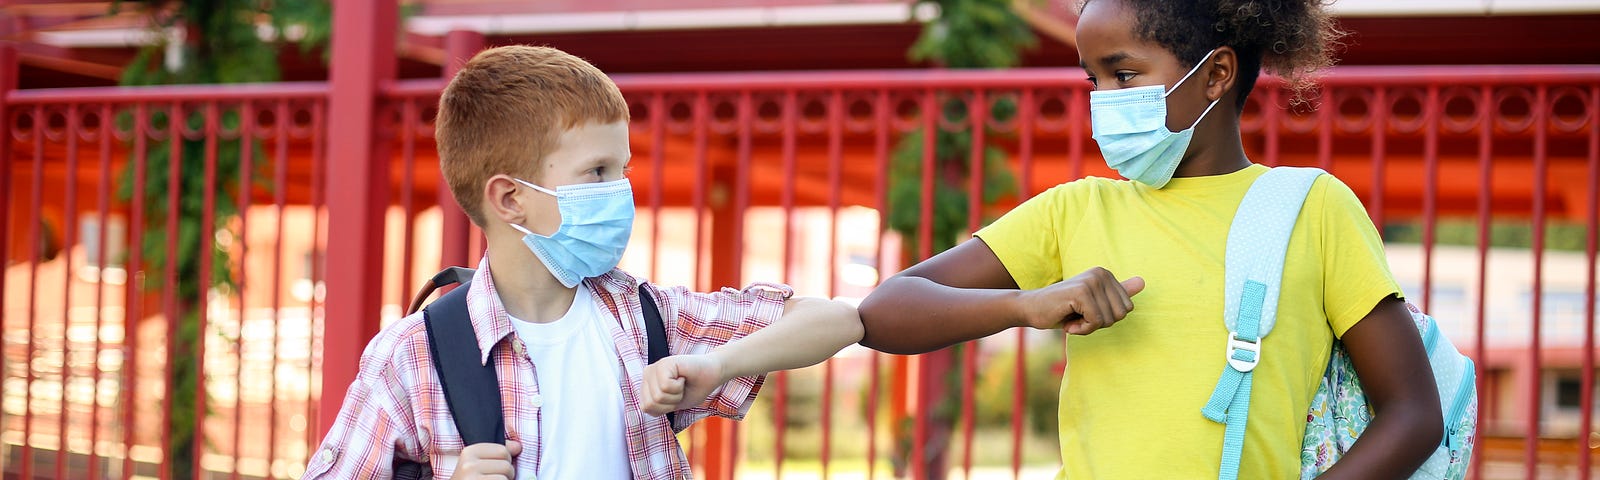 A boy and girl in masks ‘elbow bump’ at school